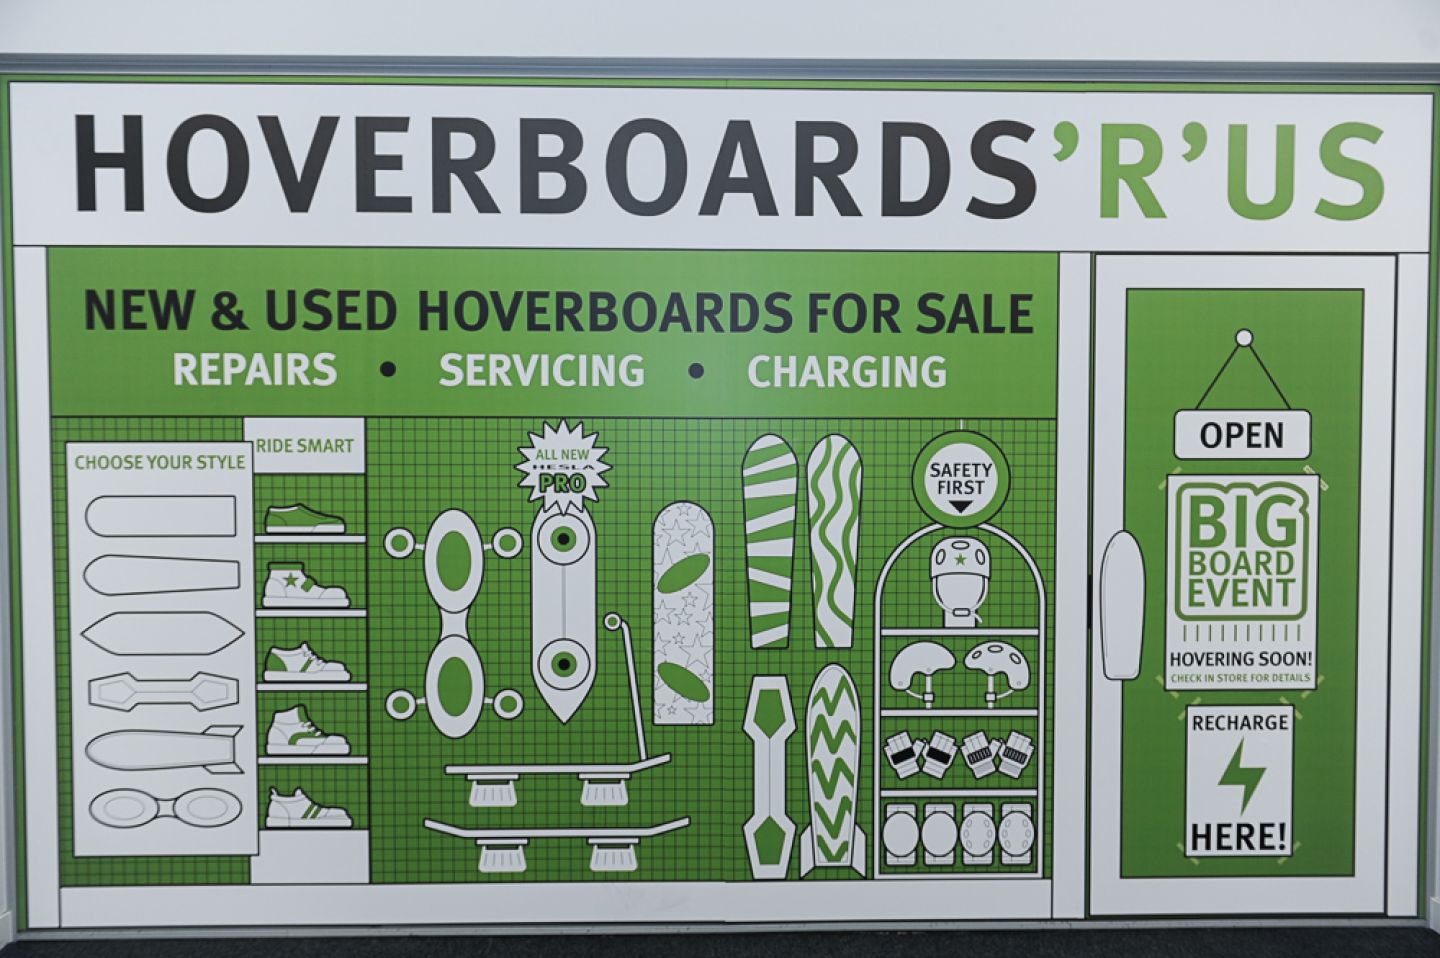 Sign at City Starters weekend: hoverboards 'r' us new and used hoverboards for sale, repairs, servicing, charging.